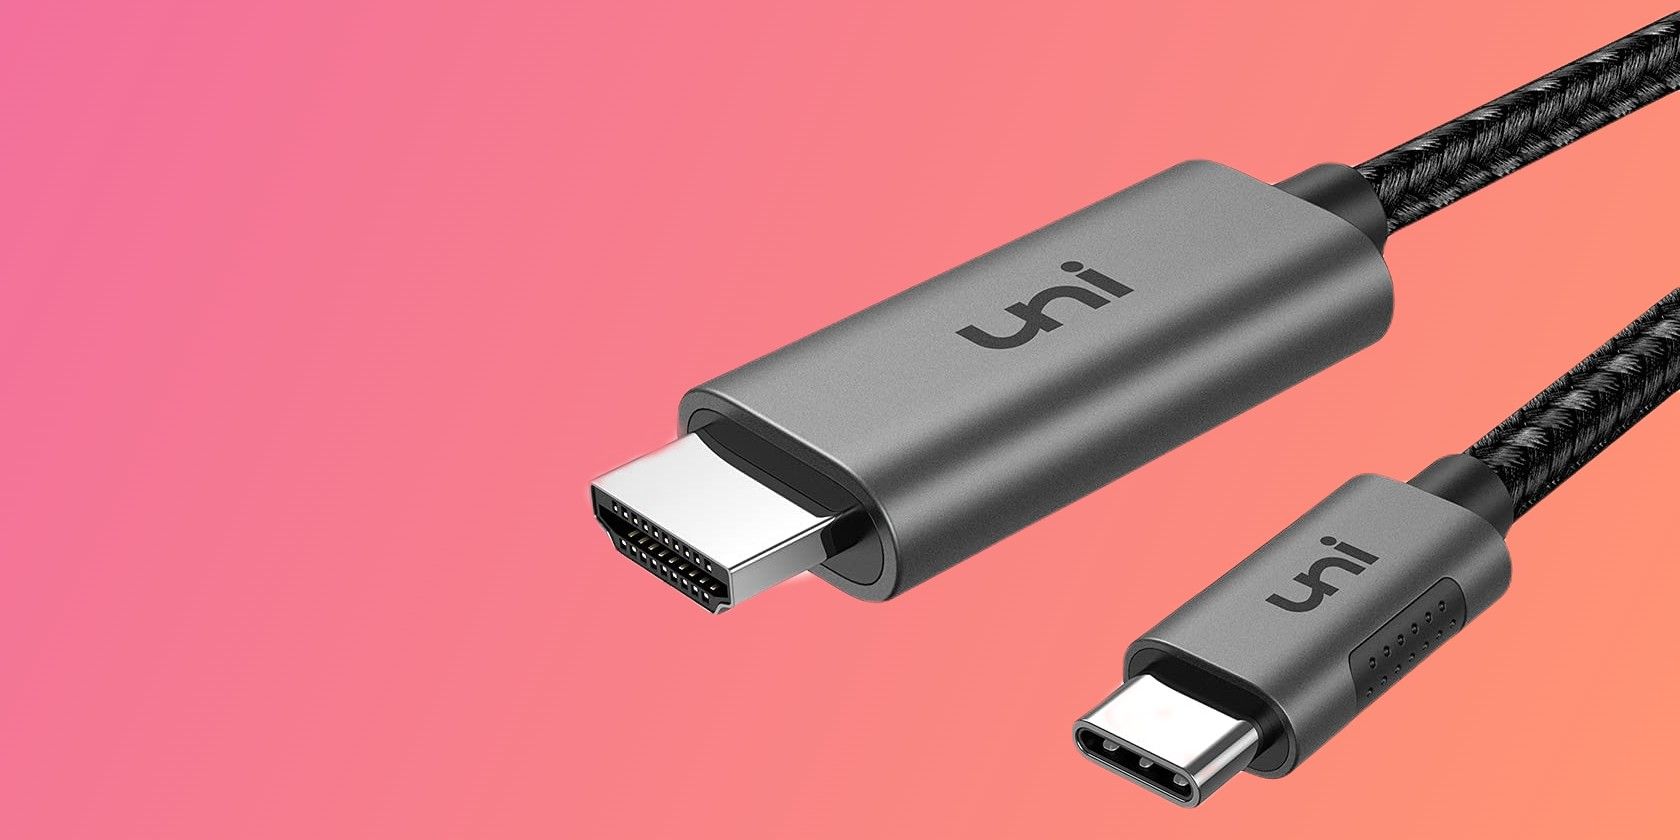 Uni USB-C to HDMI Adapter featured image